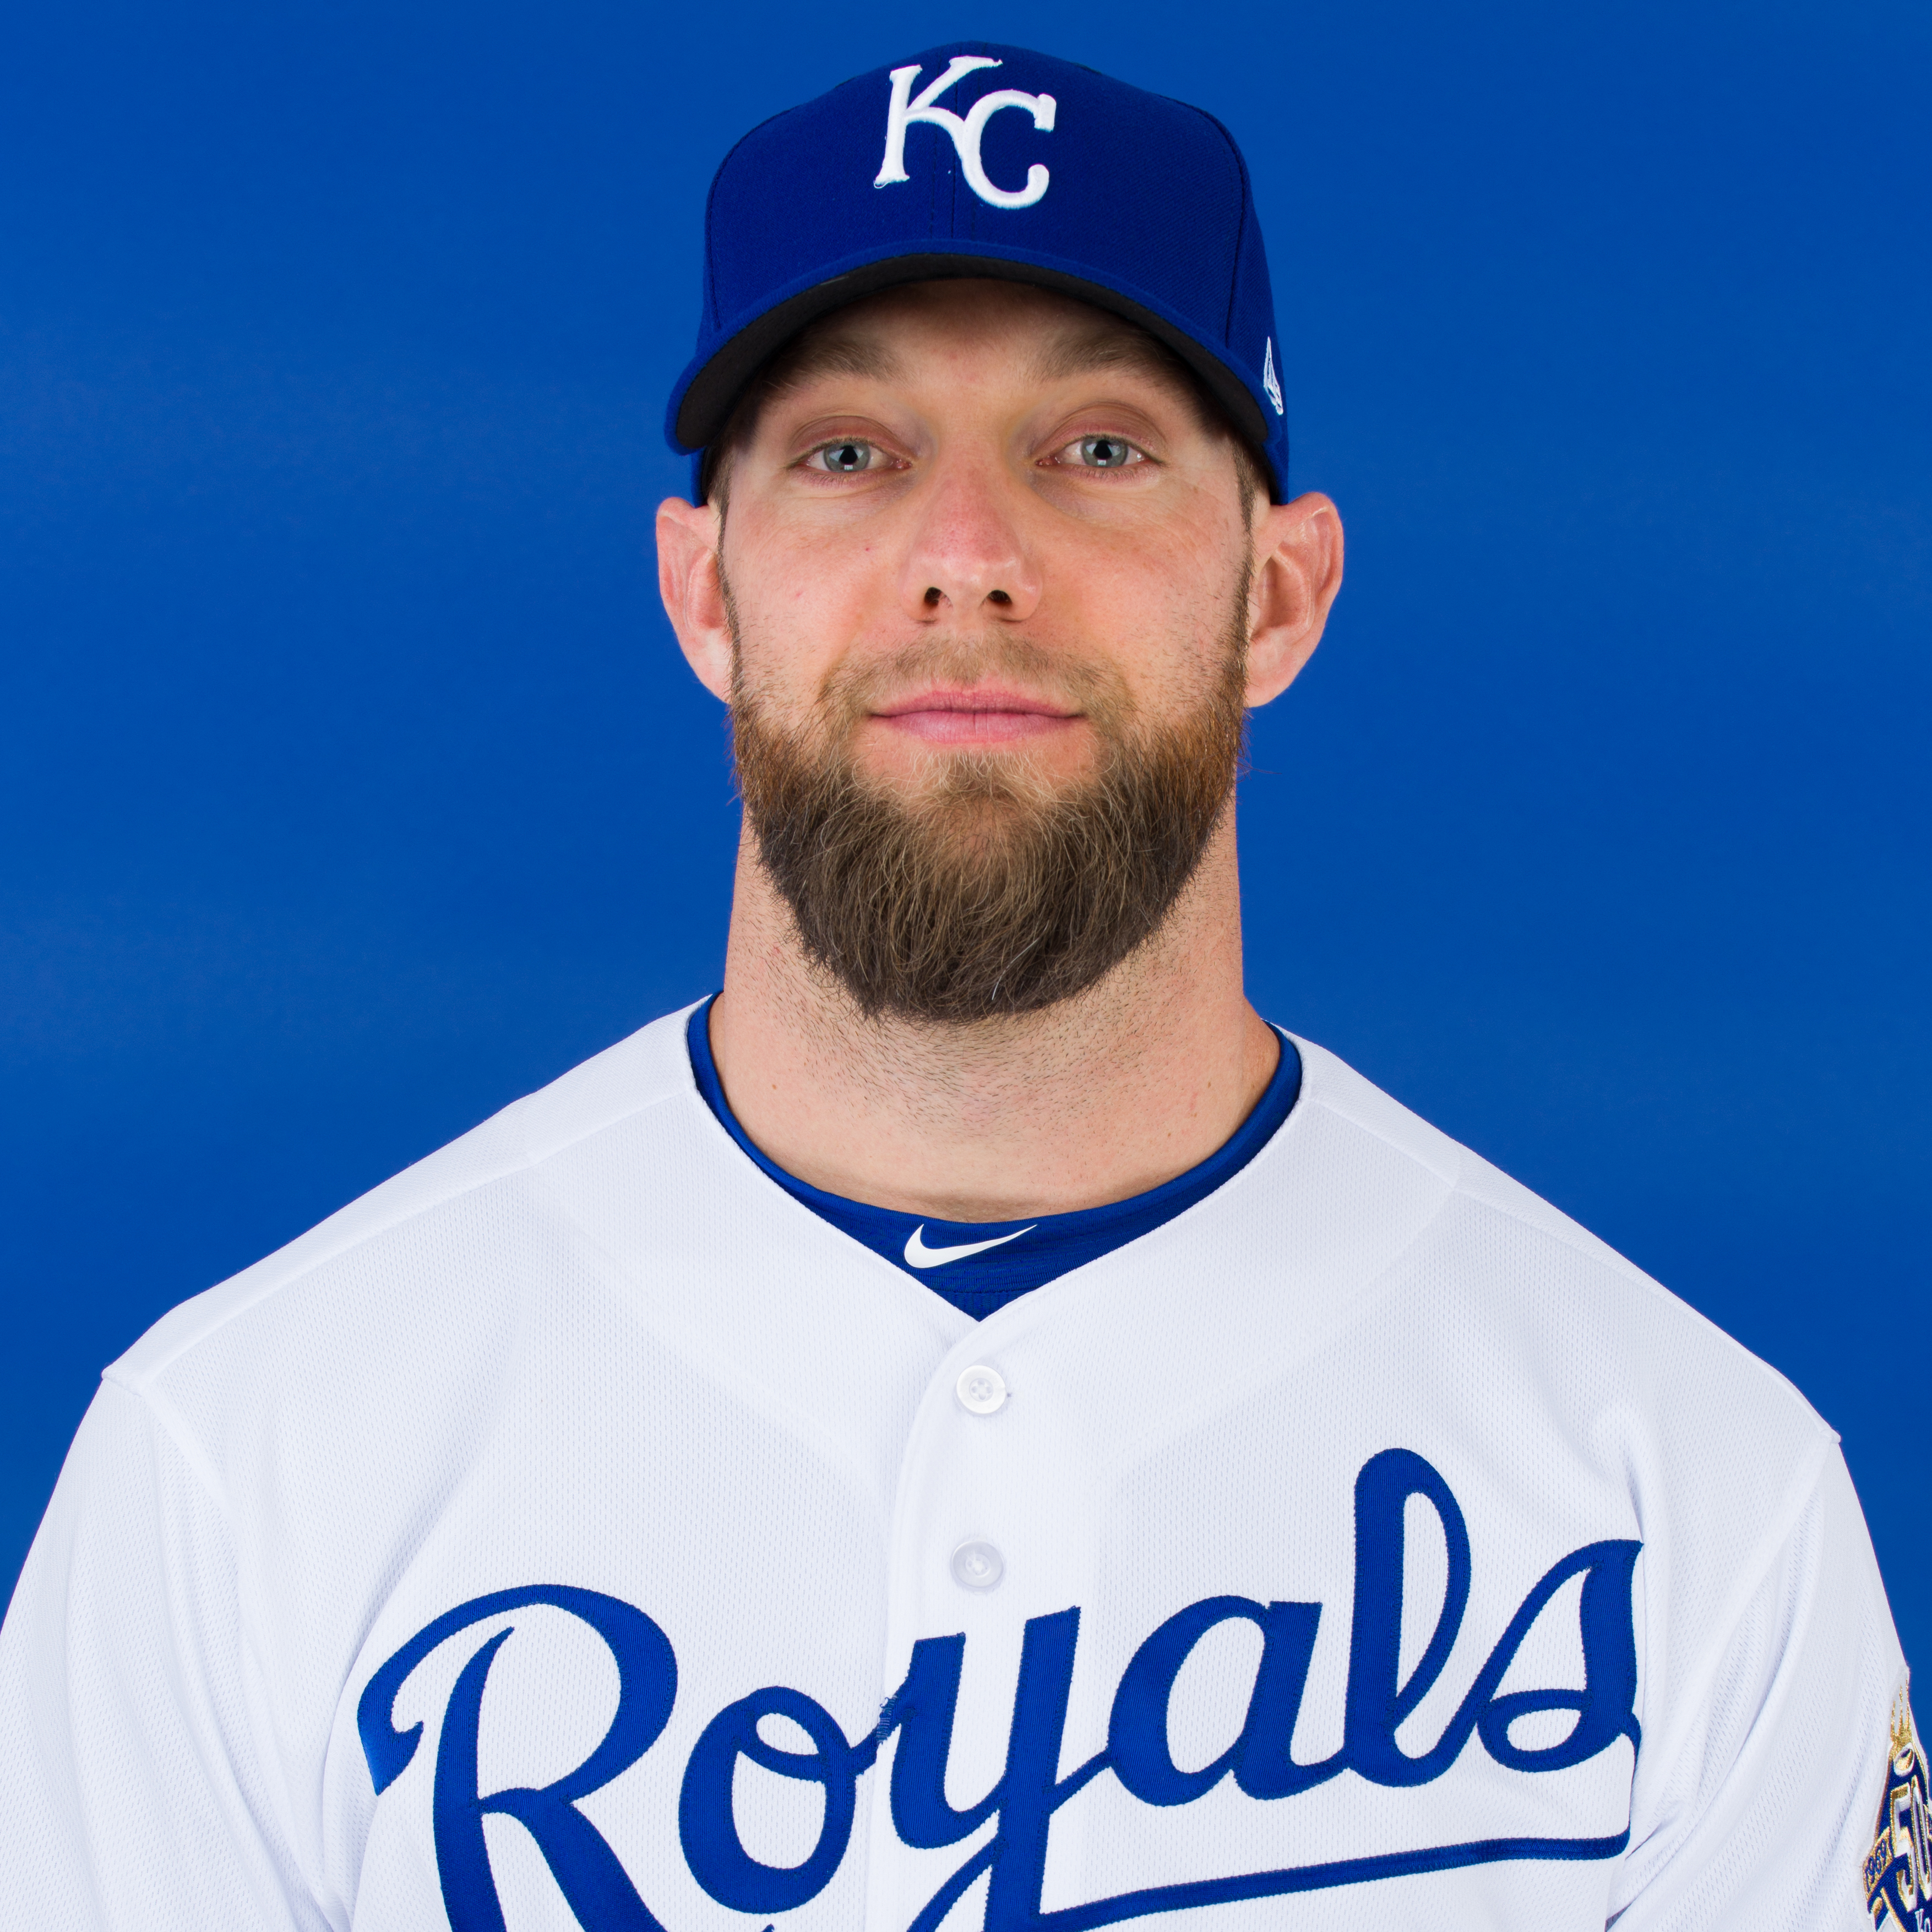 FIVE-TIME GOLD GLOVER ALEX GORDON NAMED HONORARY PACE CAR DRIVER